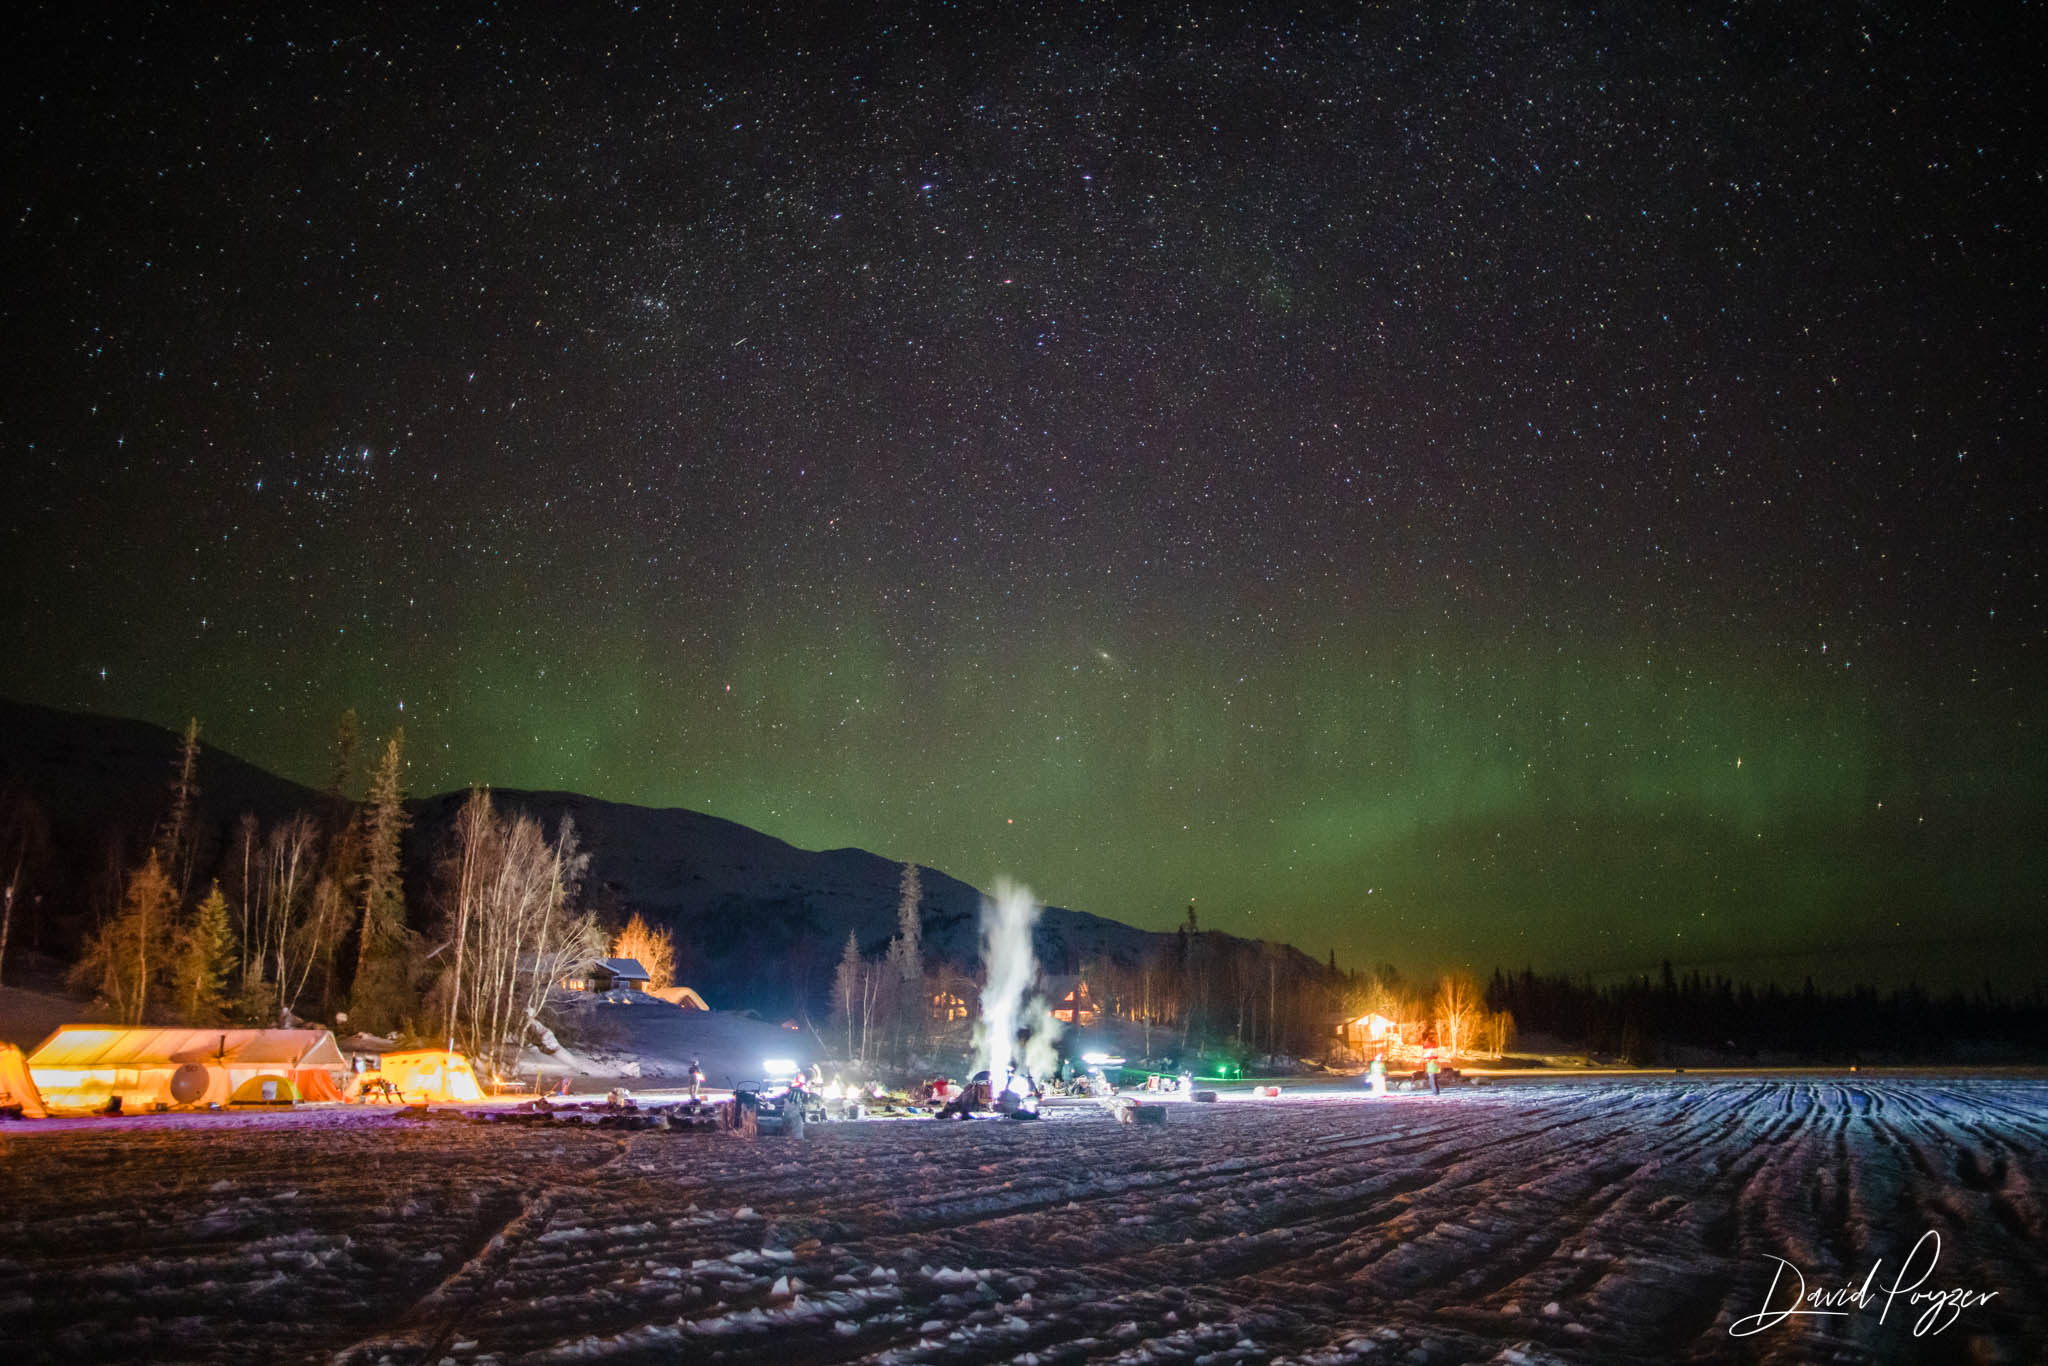 The aurora borealis dances over the dog lot at Finger Lake checkpoint.